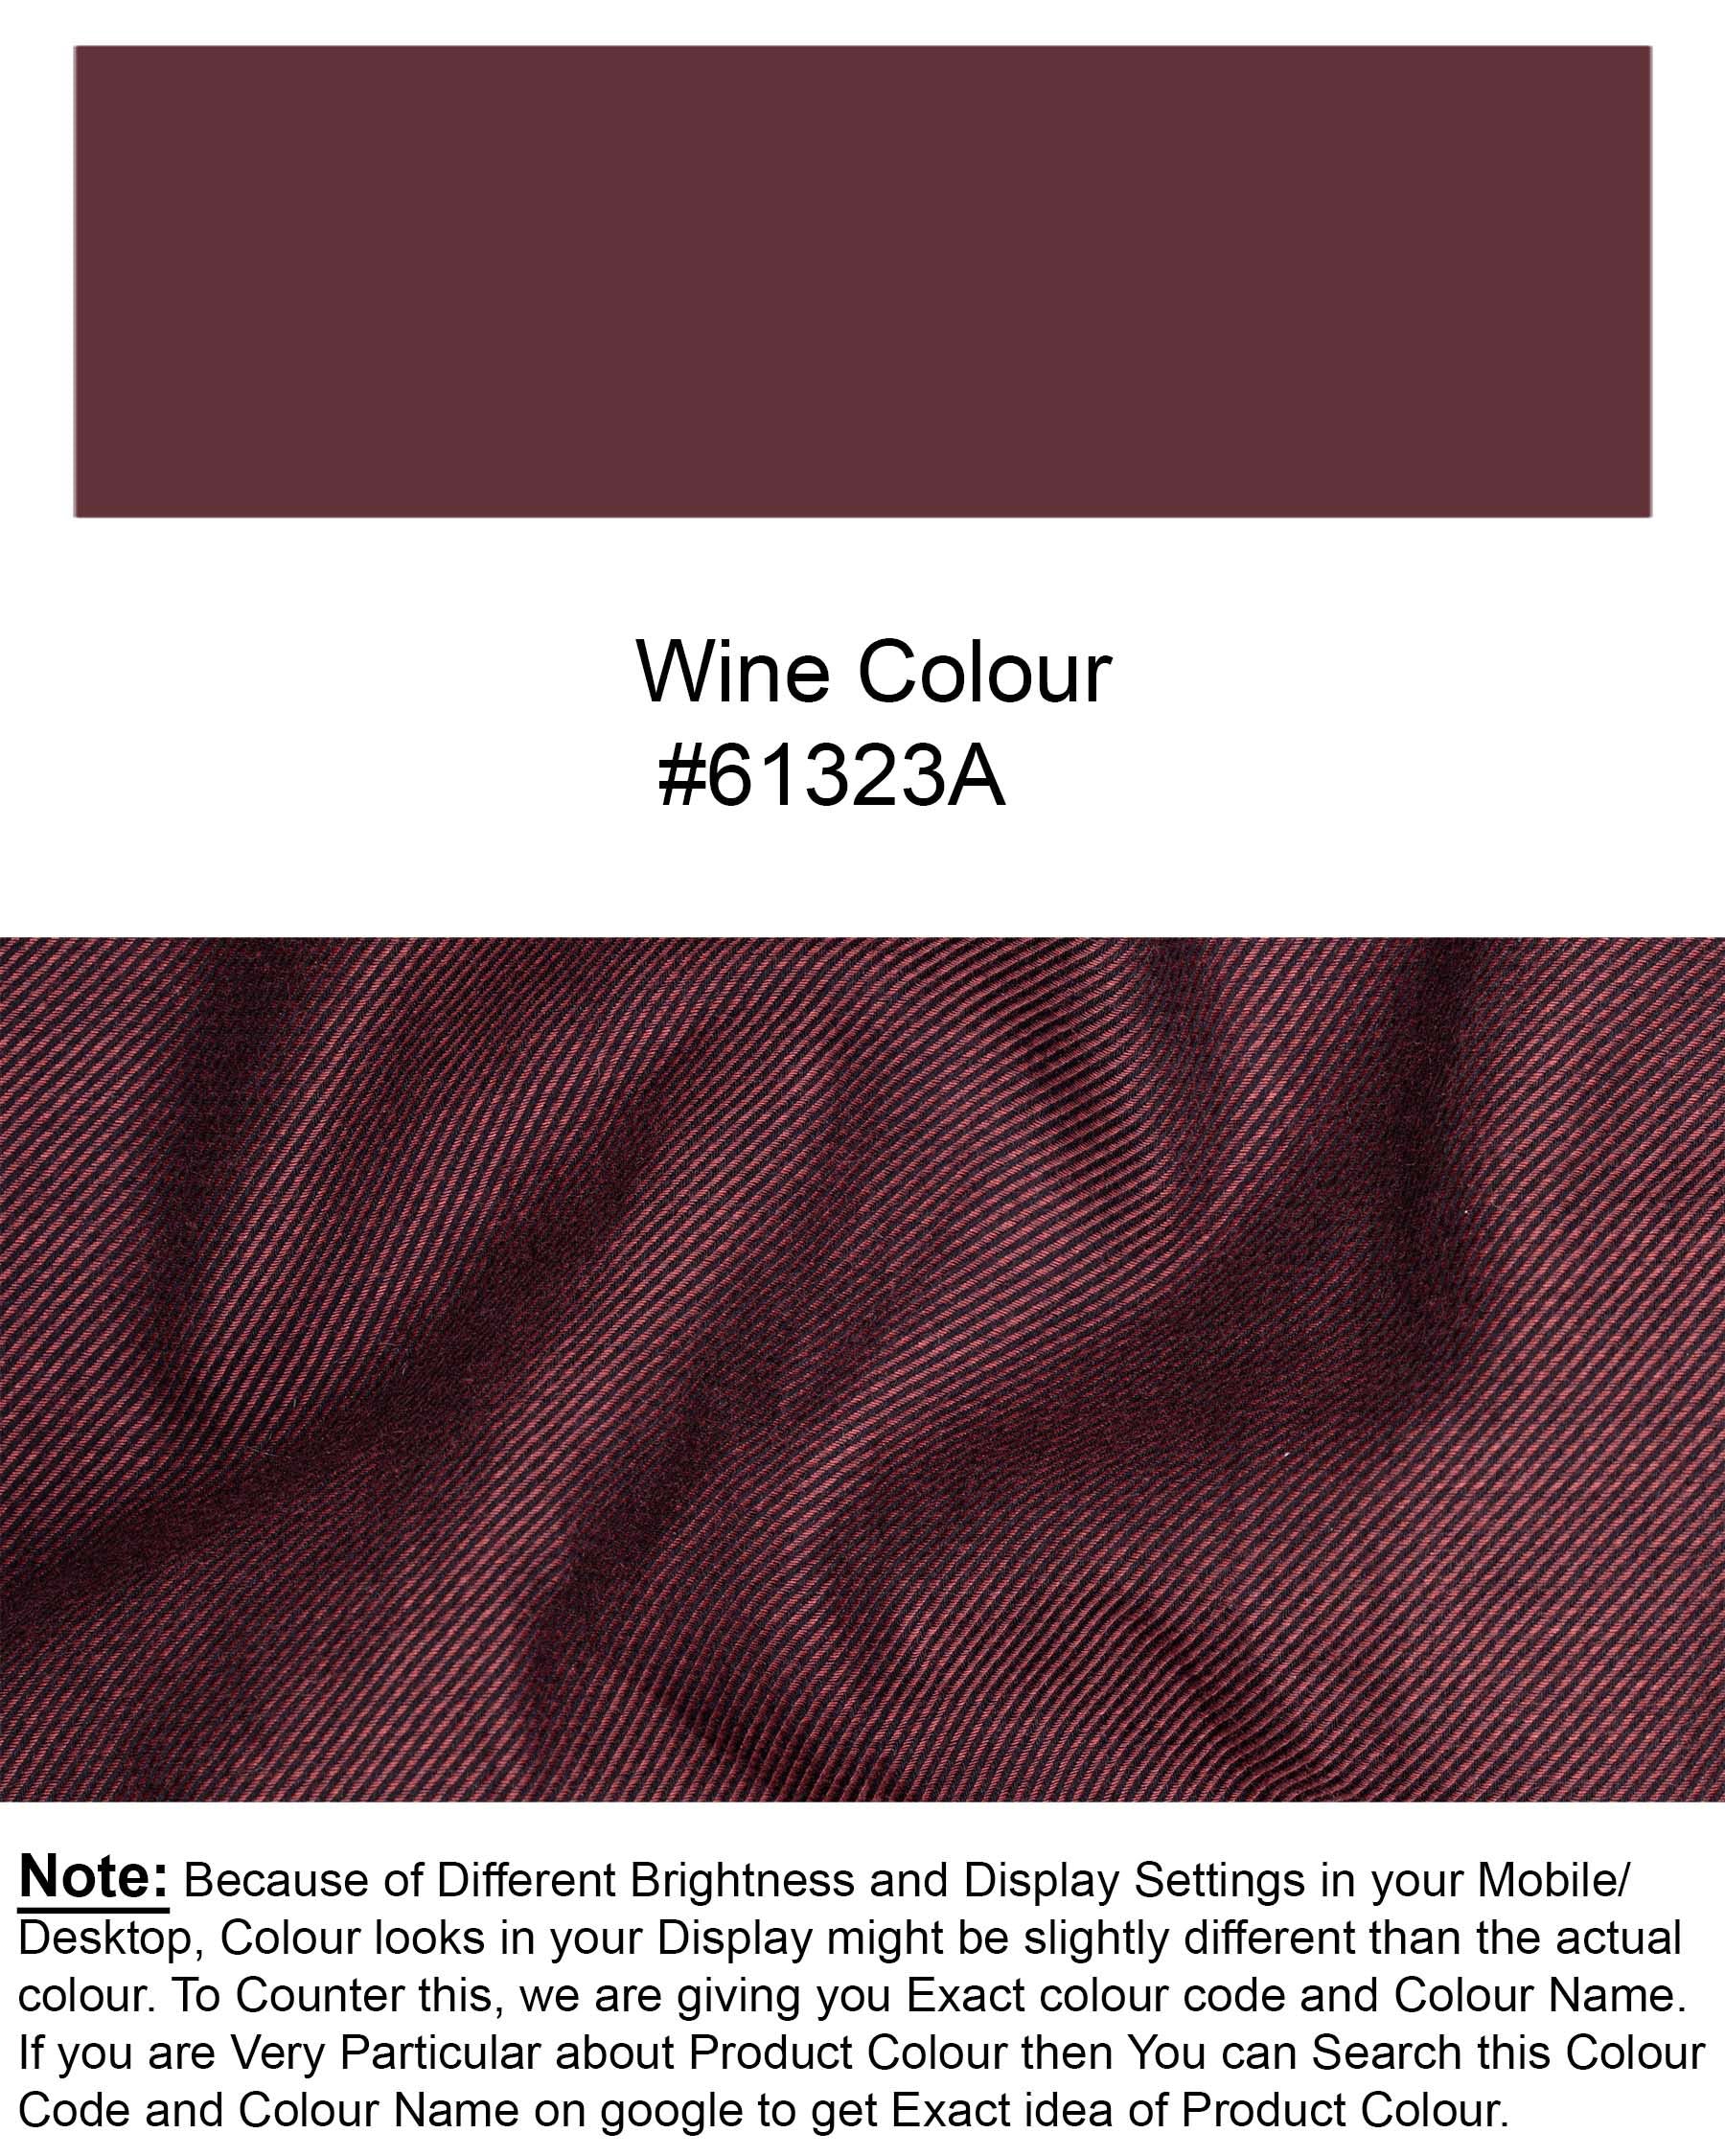 Wine Red With Black Collar and Cuffs Twill Premium Cotton Shirt 6754-BCC-BLK-38,6754-BCC-BLK-38,6754-BCC-BLK-39,6754-BCC-BLK-39,6754-BCC-BLK-40,6754-BCC-BLK-40,6754-BCC-BLK-42,6754-BCC-BLK-42,6754-BCC-BLK-44,6754-BCC-BLK-44,6754-BCC-BLK-46,6754-BCC-BLK-46,6754-BCC-BLK-48,6754-BCC-BLK-48,6754-BCC-BLK-50,6754-BCC-BLK-50,6754-BCC-BLK-52,6754-BCC-BLK-52